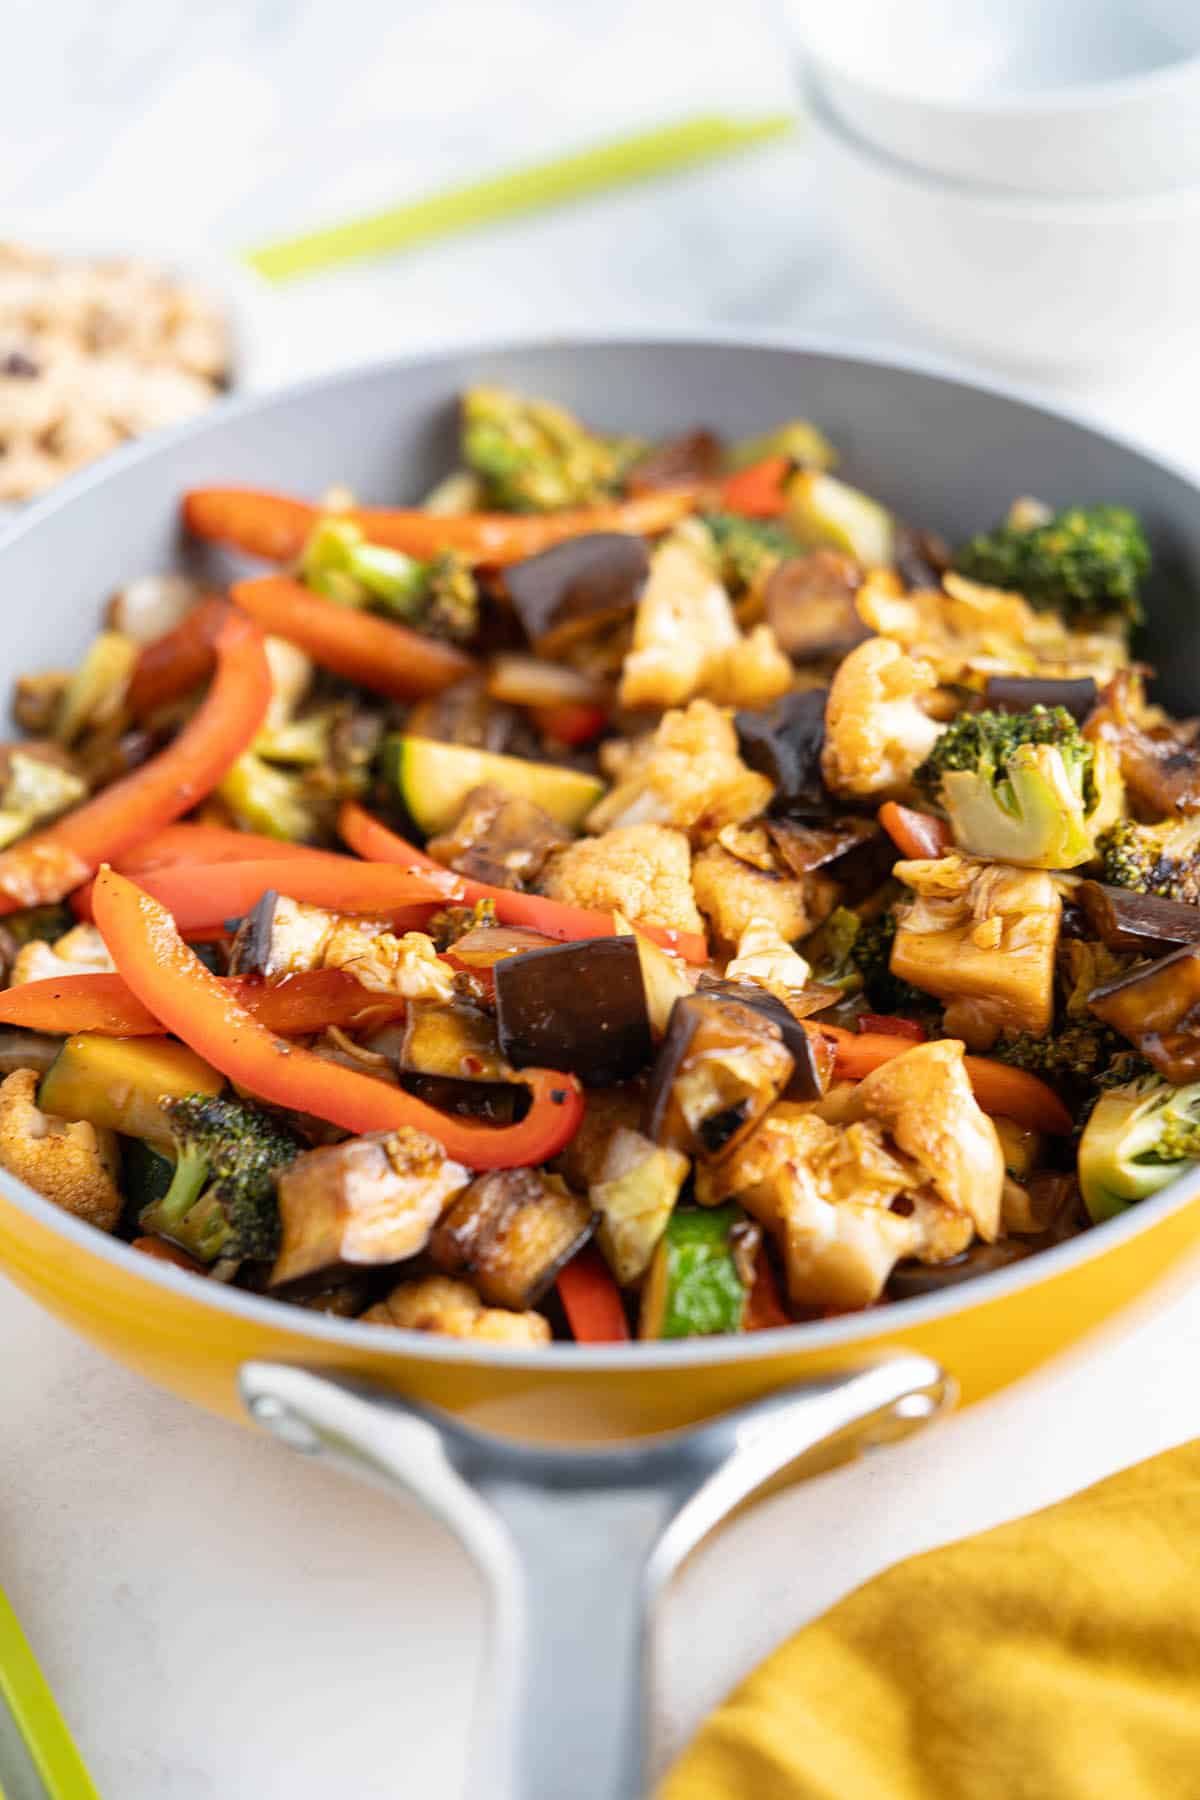 Stir fry vegetables in a spicy sauce in a fry pan.